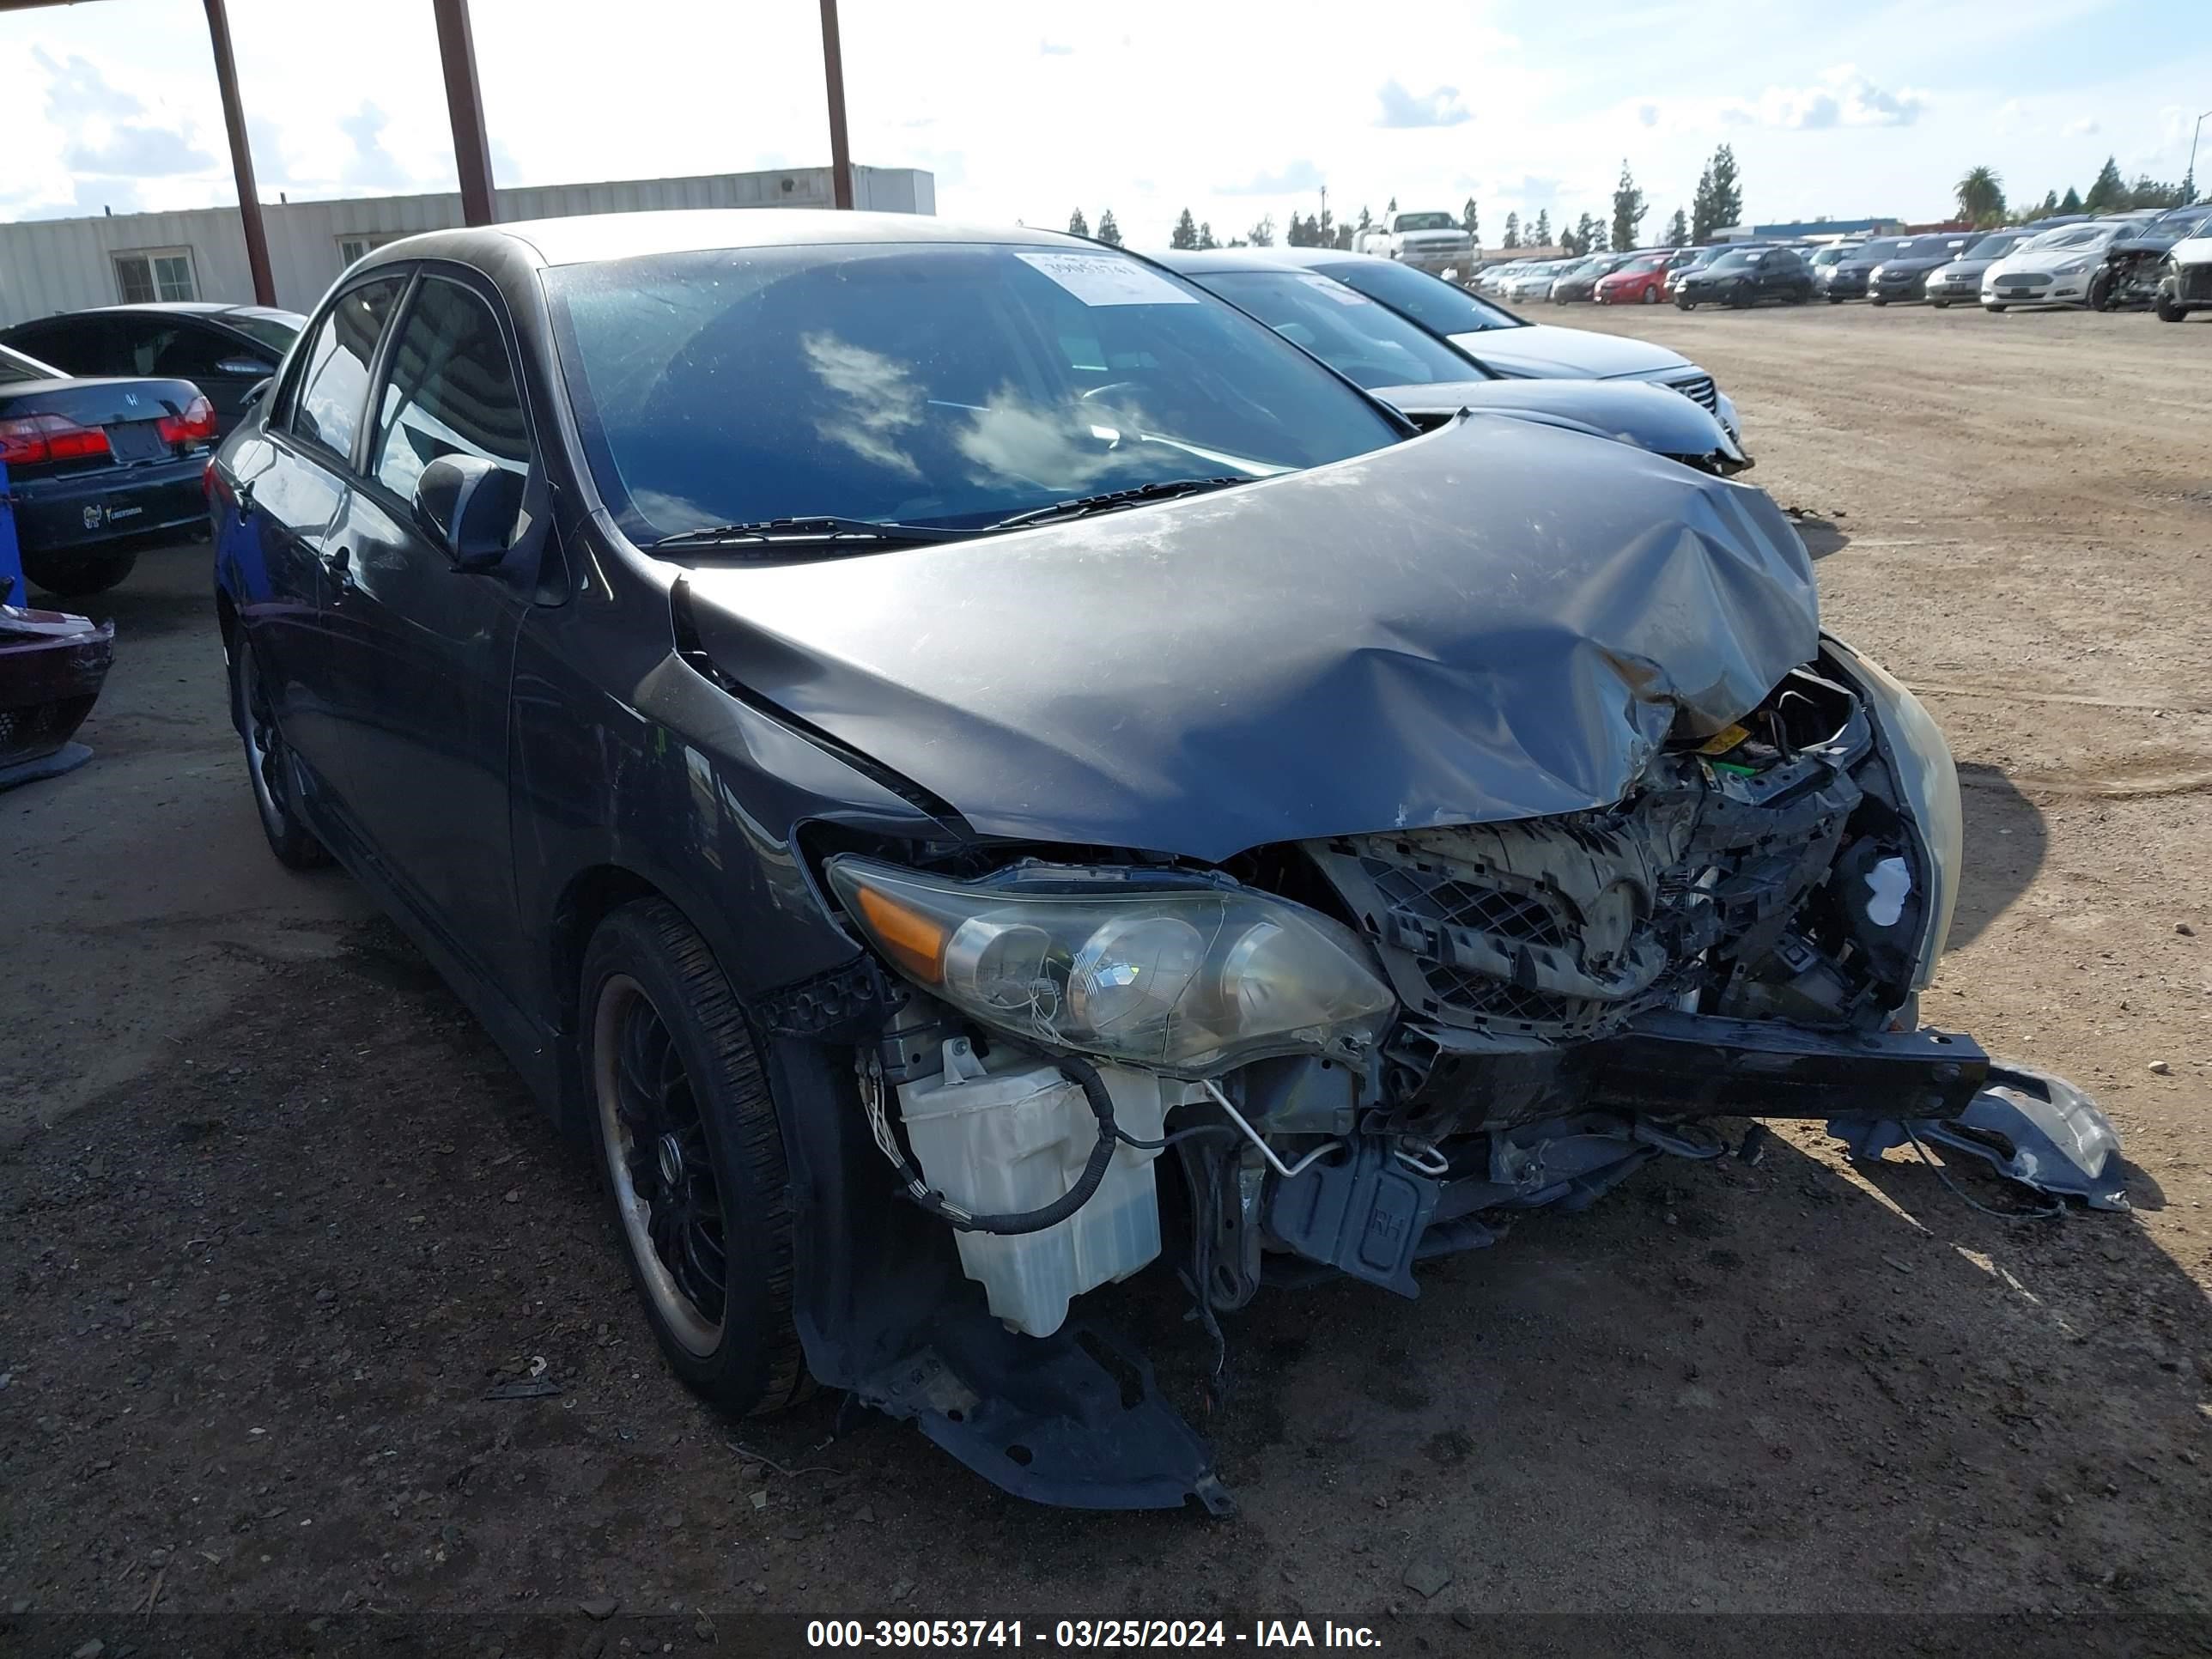 vin: 5YFBU4EE1CP046732 5YFBU4EE1CP046732 2012 toyota corolla 1800 for Sale in 93705, 1805 N Lafayette Ave, Fresno, California, USA